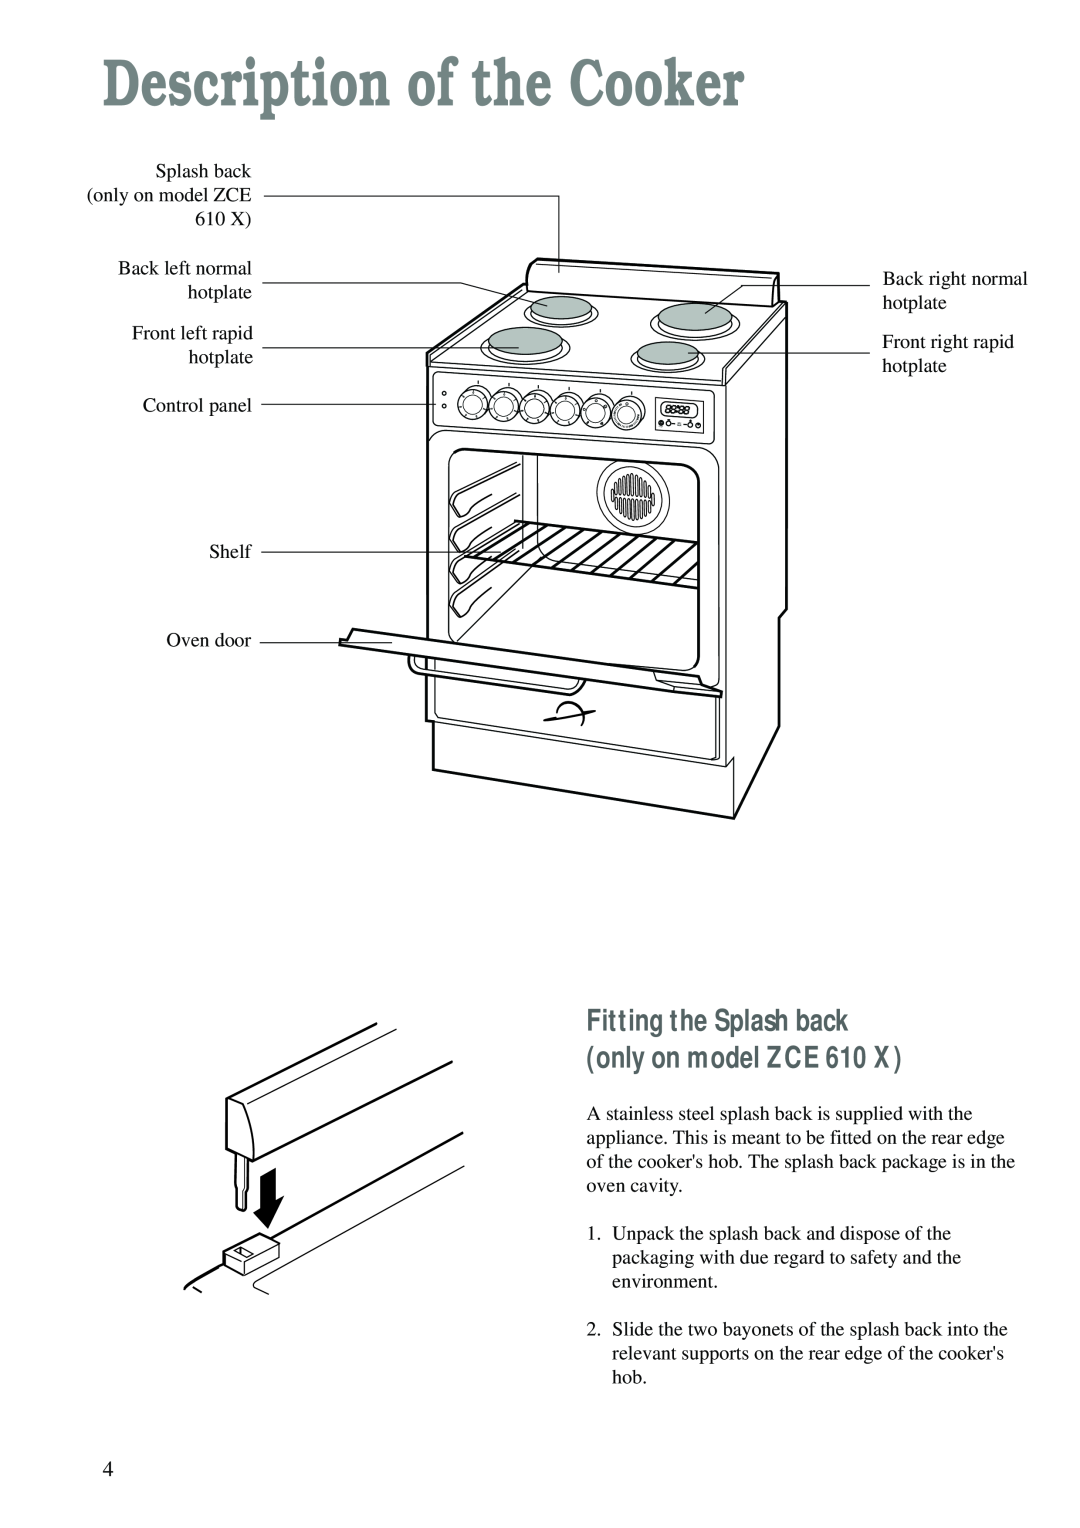 Zanussi ZCE 600 W, ZCE 610 X manual Description of the Cooker, Fitting the Splash back only on model ZCE 